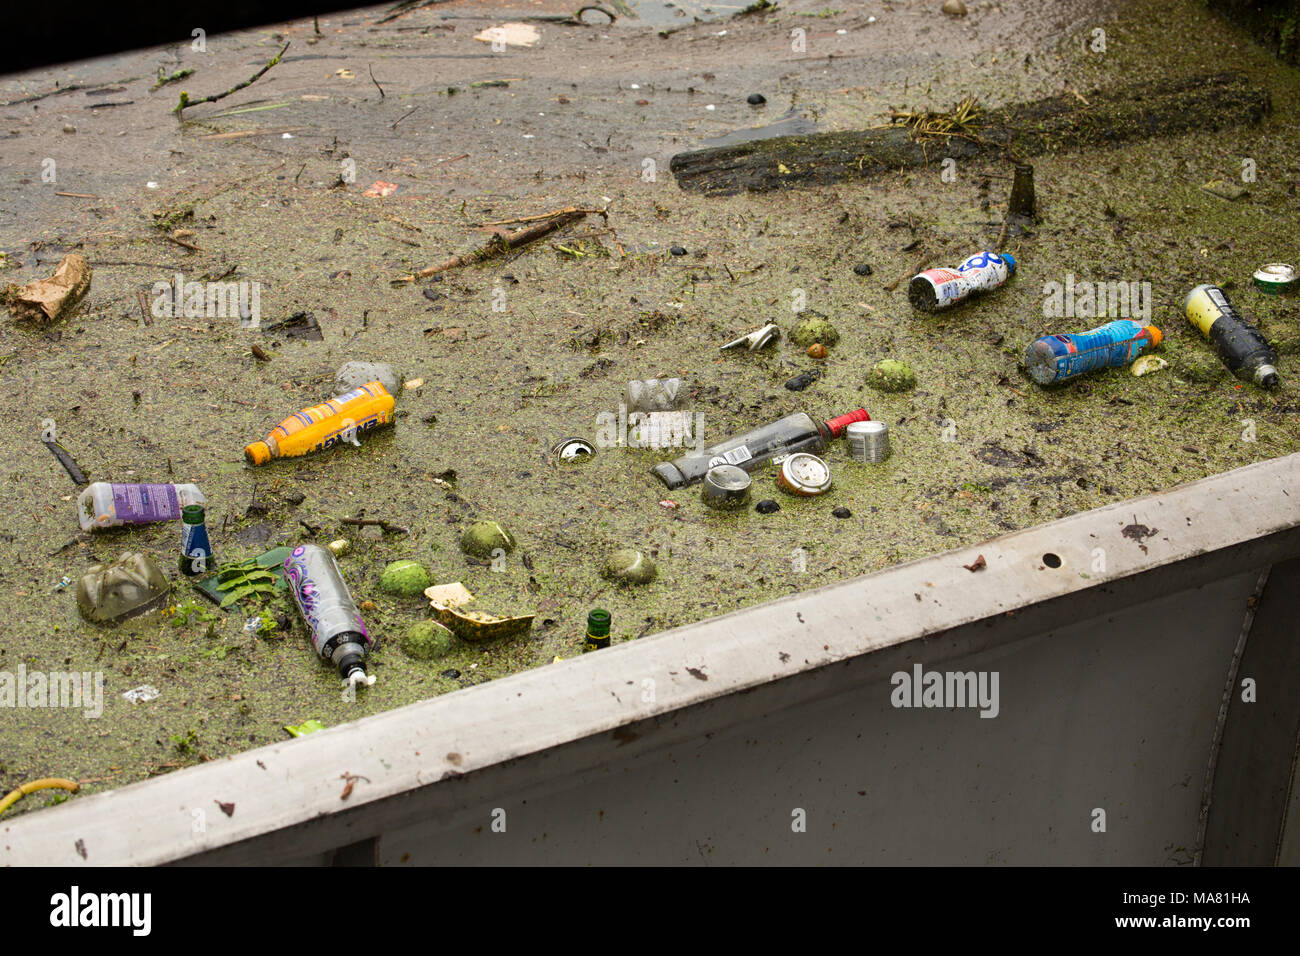 Plastic bottles, tennis balls and other rubbish accumulating about a sluice gate, River Avon Salisbury Wiltshire England UK GB Stock Photo